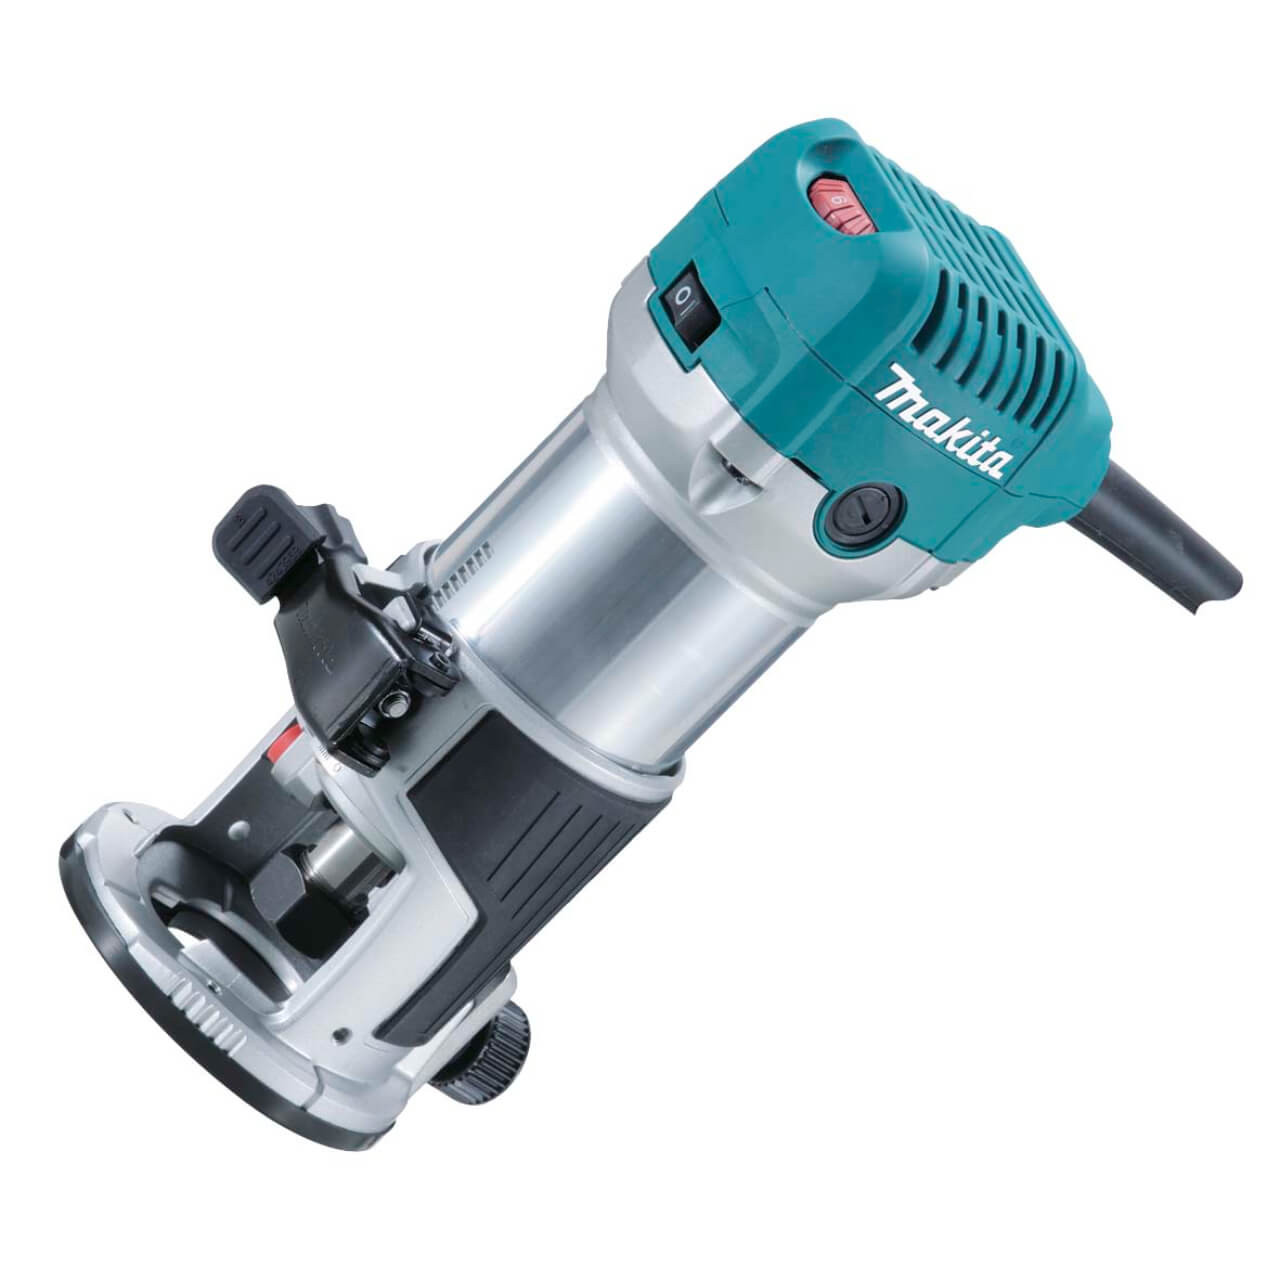 Makita 6.35mm (1/4”) Router. 710W. Carry case